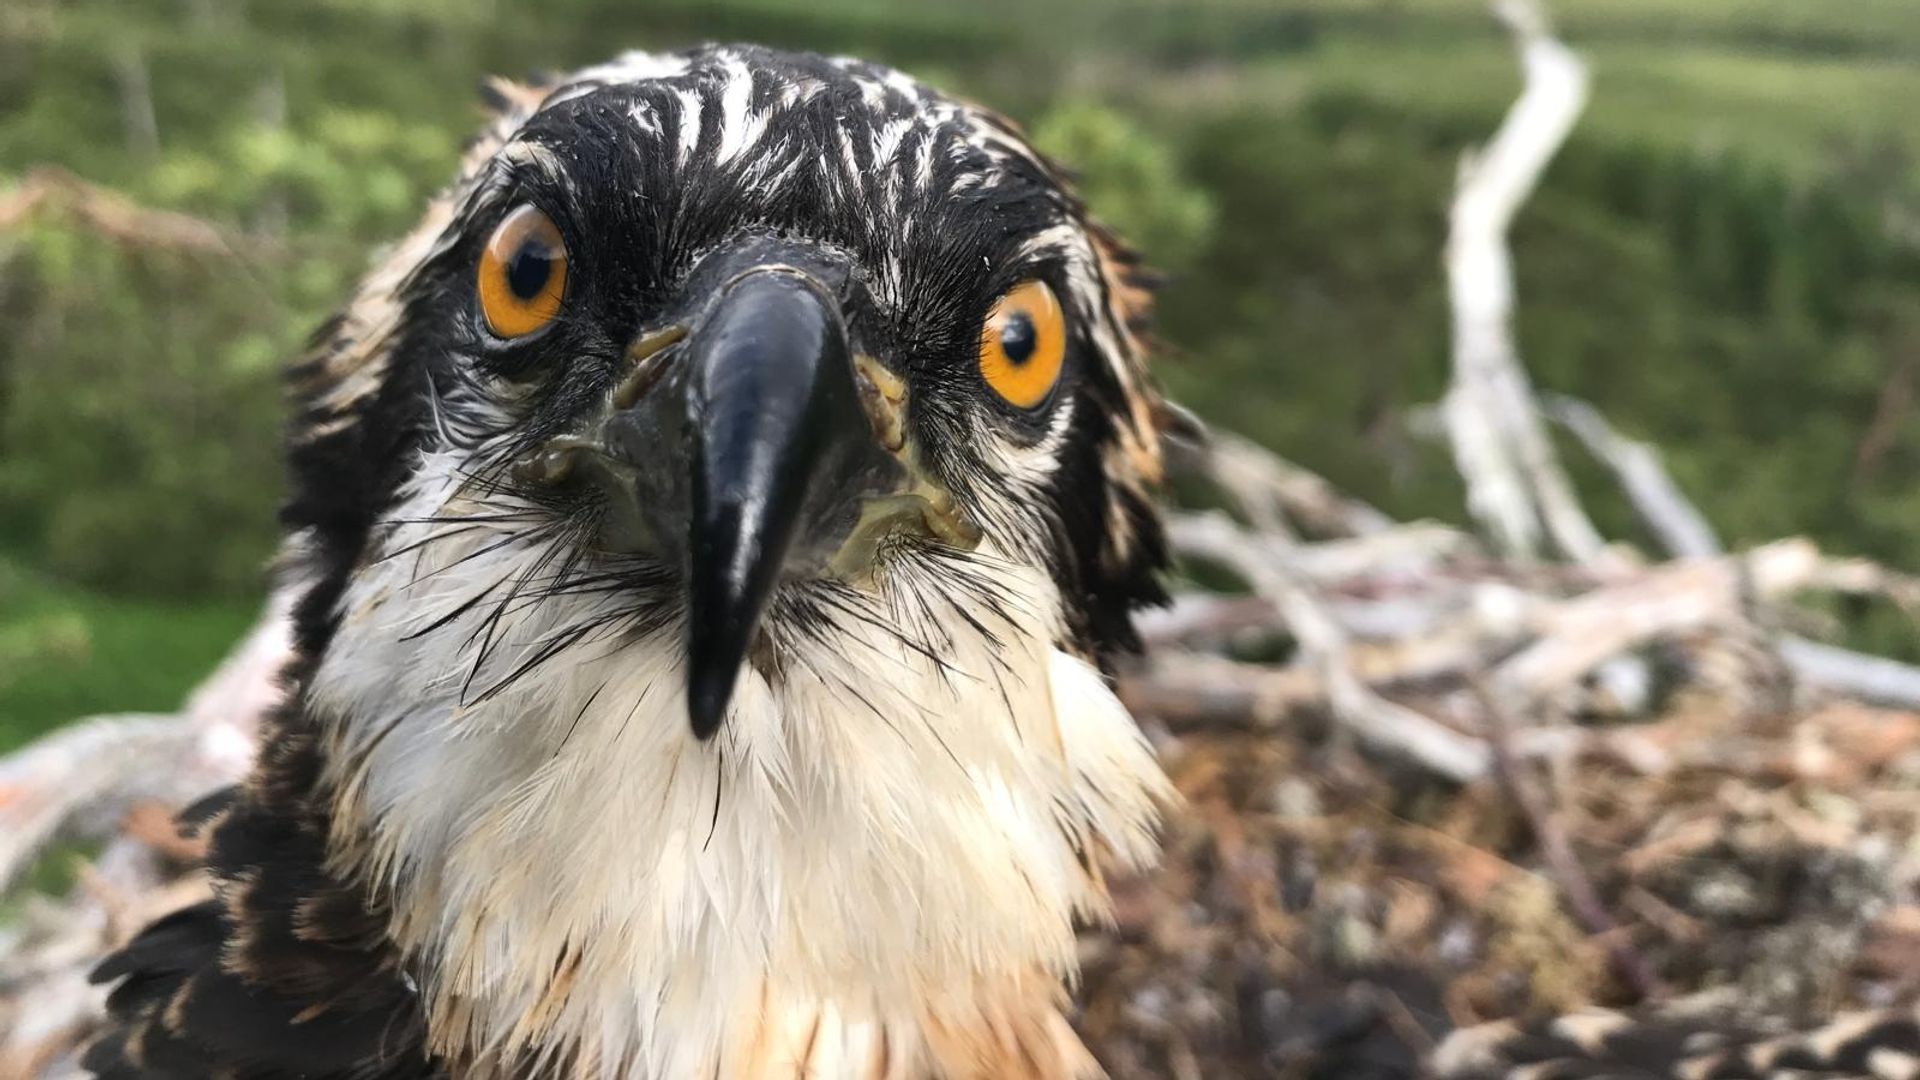 Osprey chicks to be relocated amid concern over dad's hunting performance